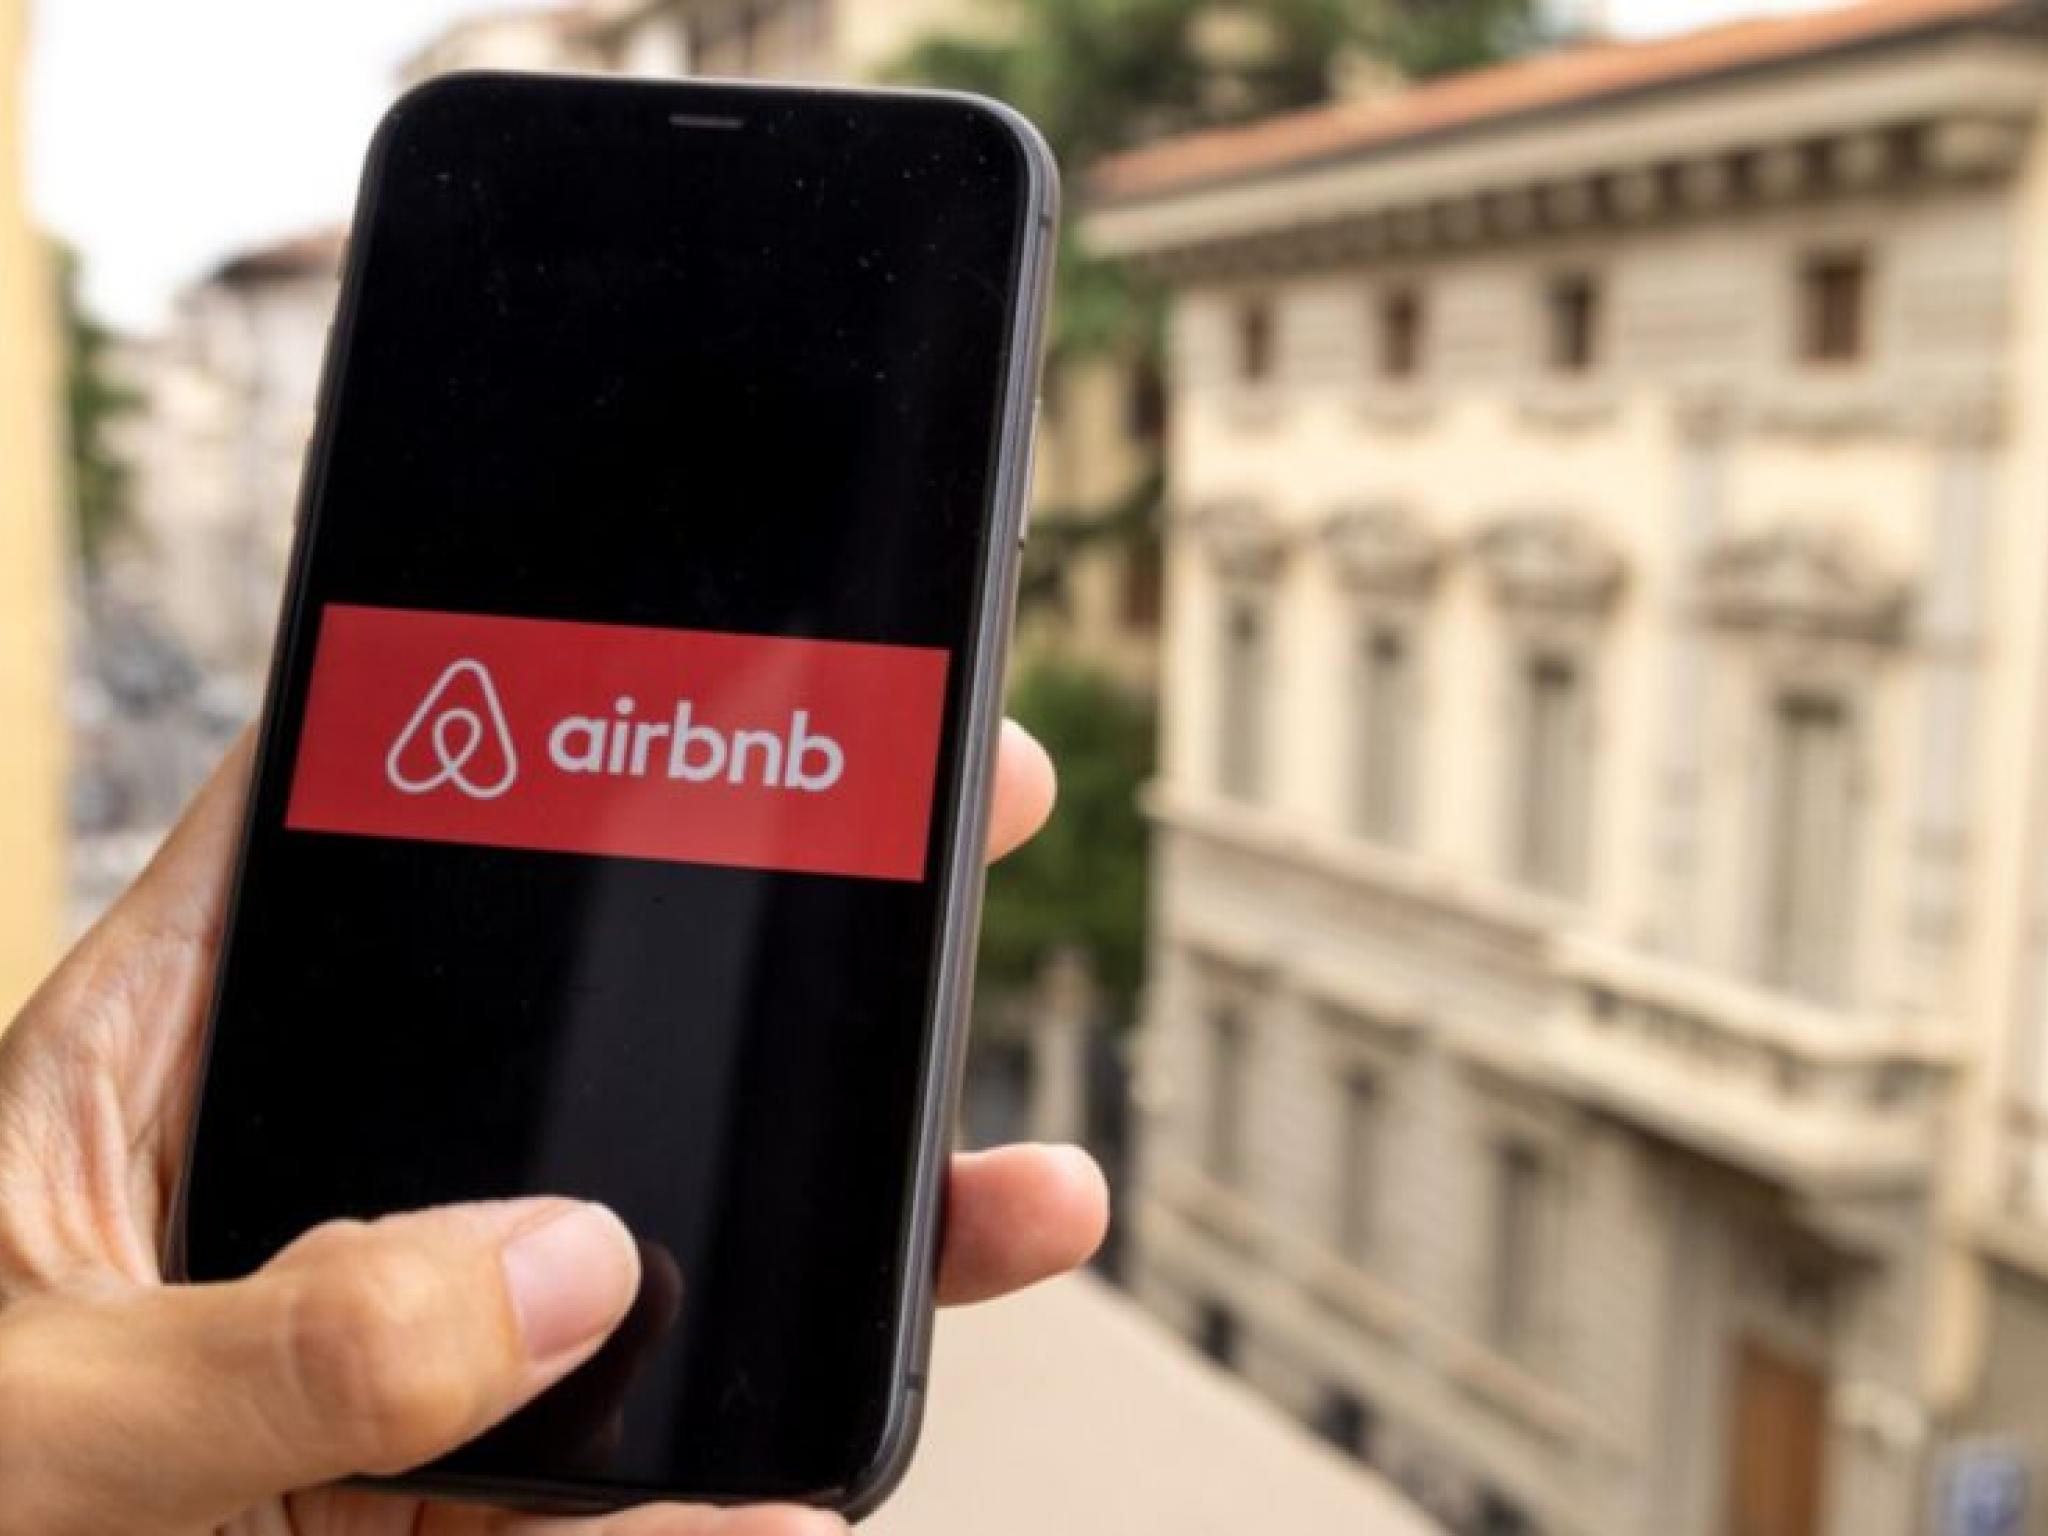  investors-are-selling-airbnb-stock-thursday-whats-going-on 